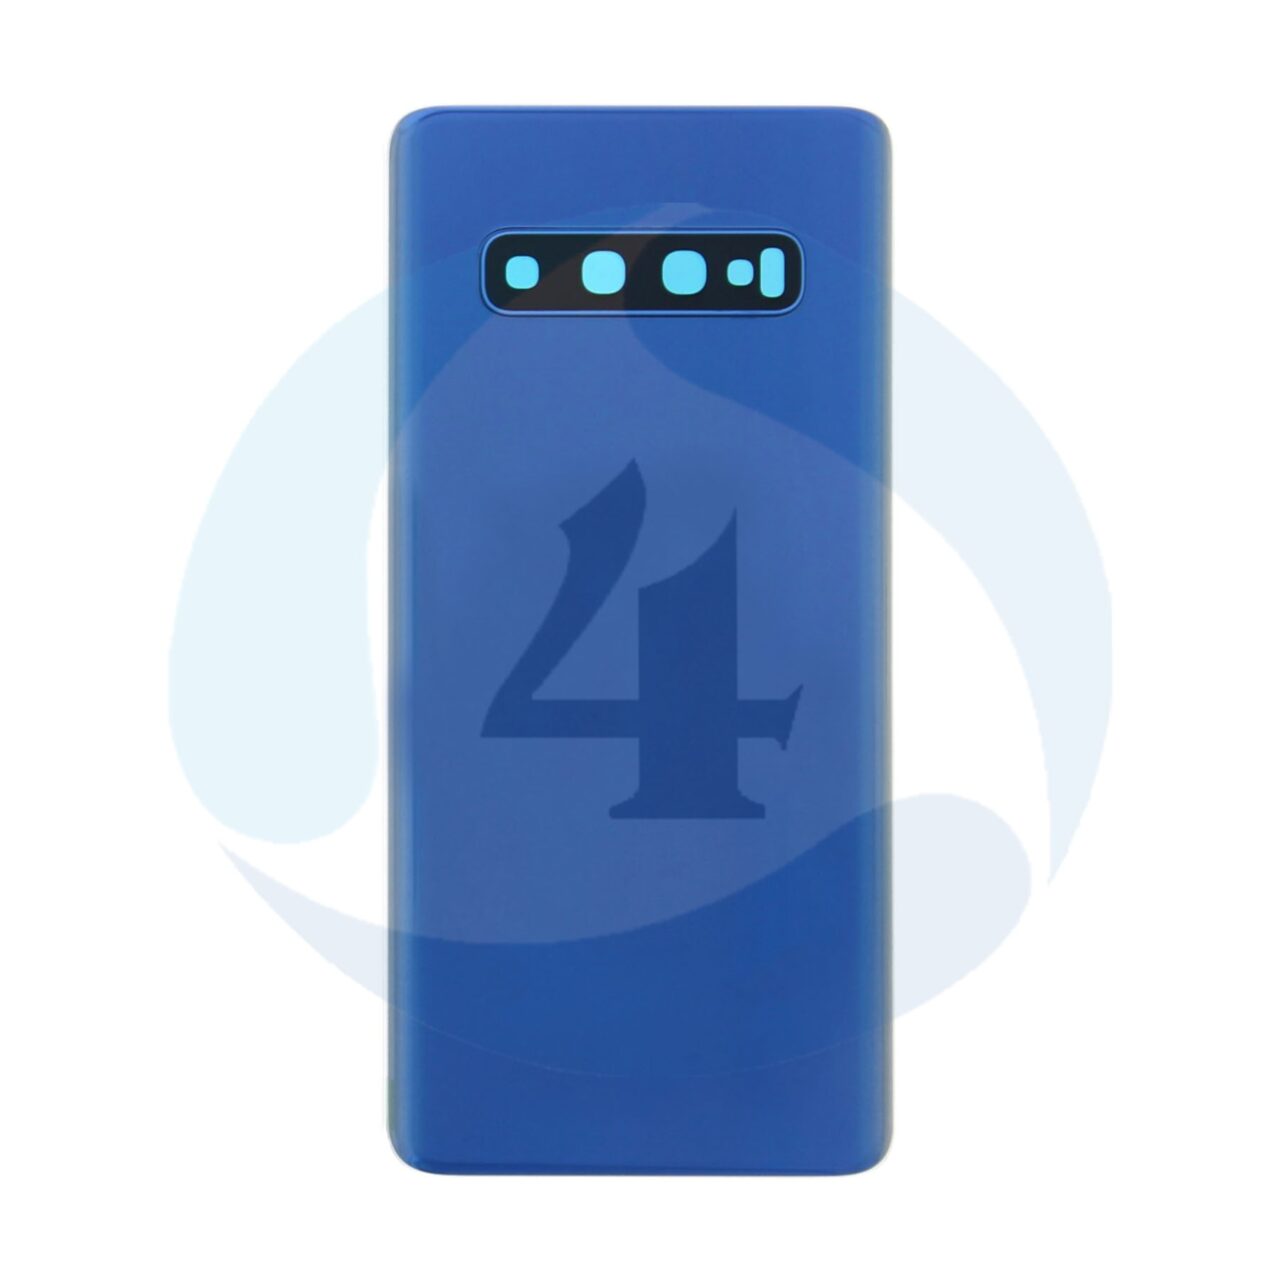 Backcover Prism Blue For Samsung Galaxy G975 F S10 Plus